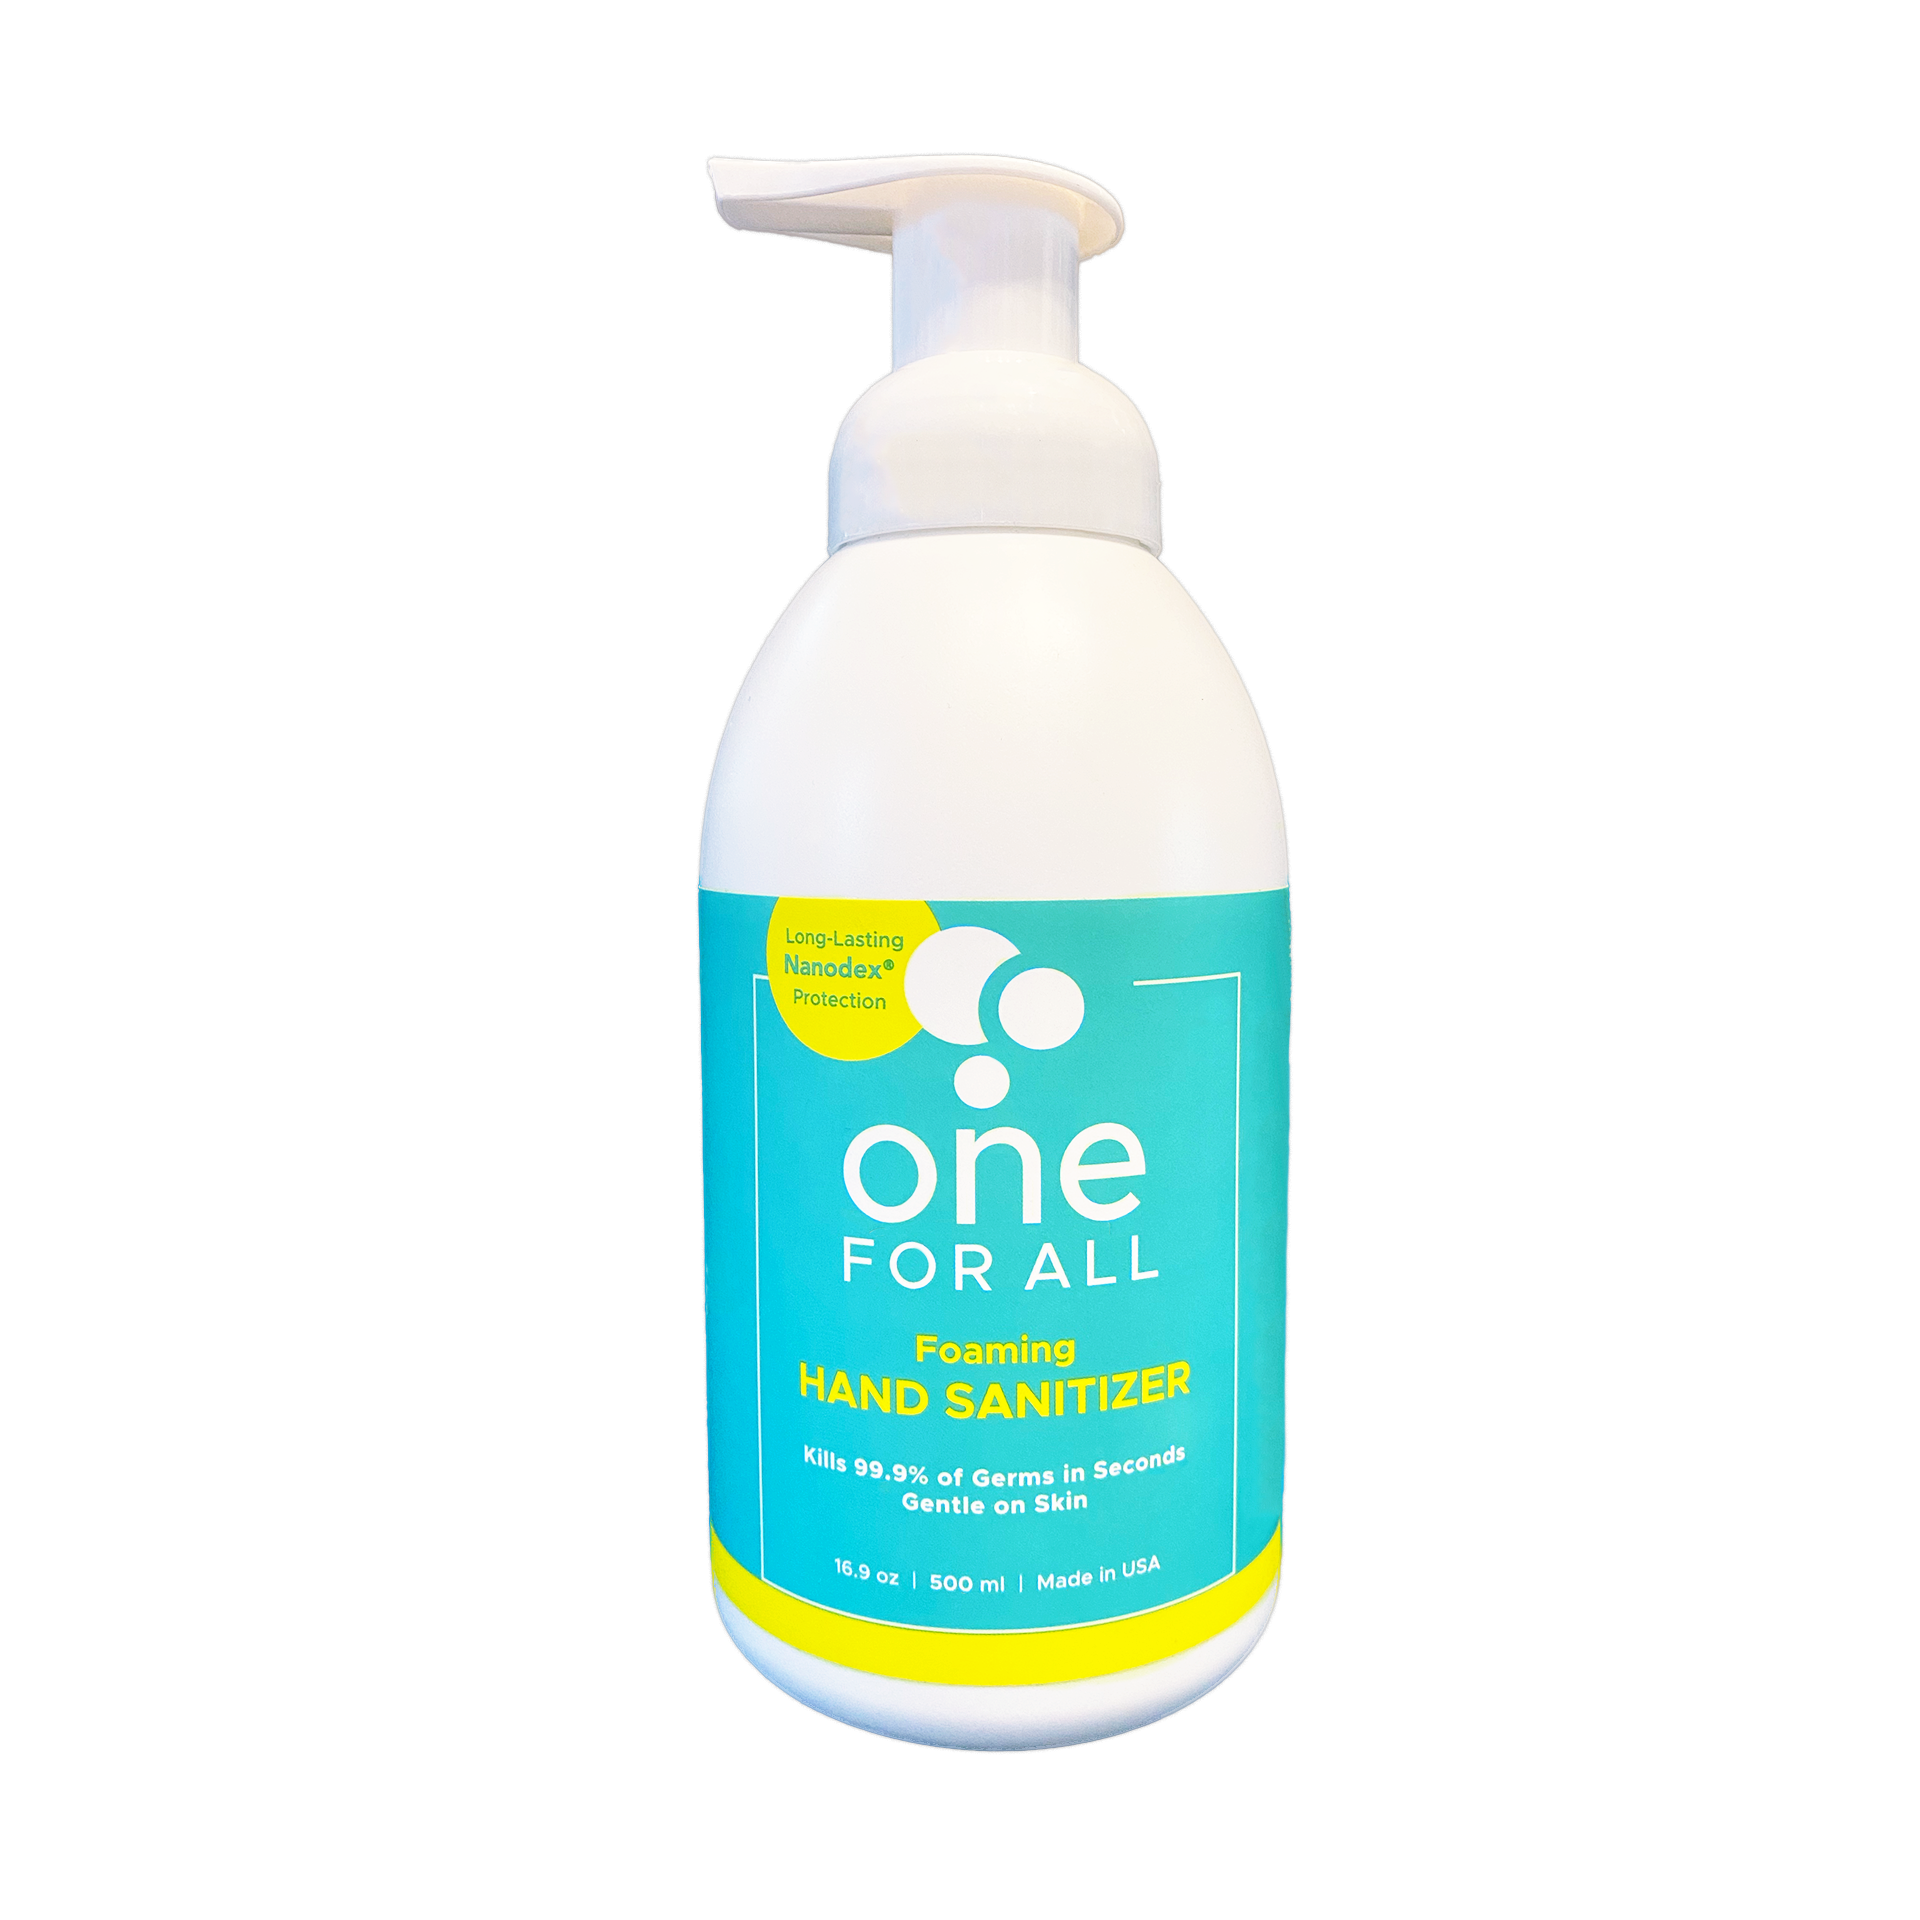 Ho Dental’s New Hand Sanitizer Formulated to Protect Dental Staff and Patients